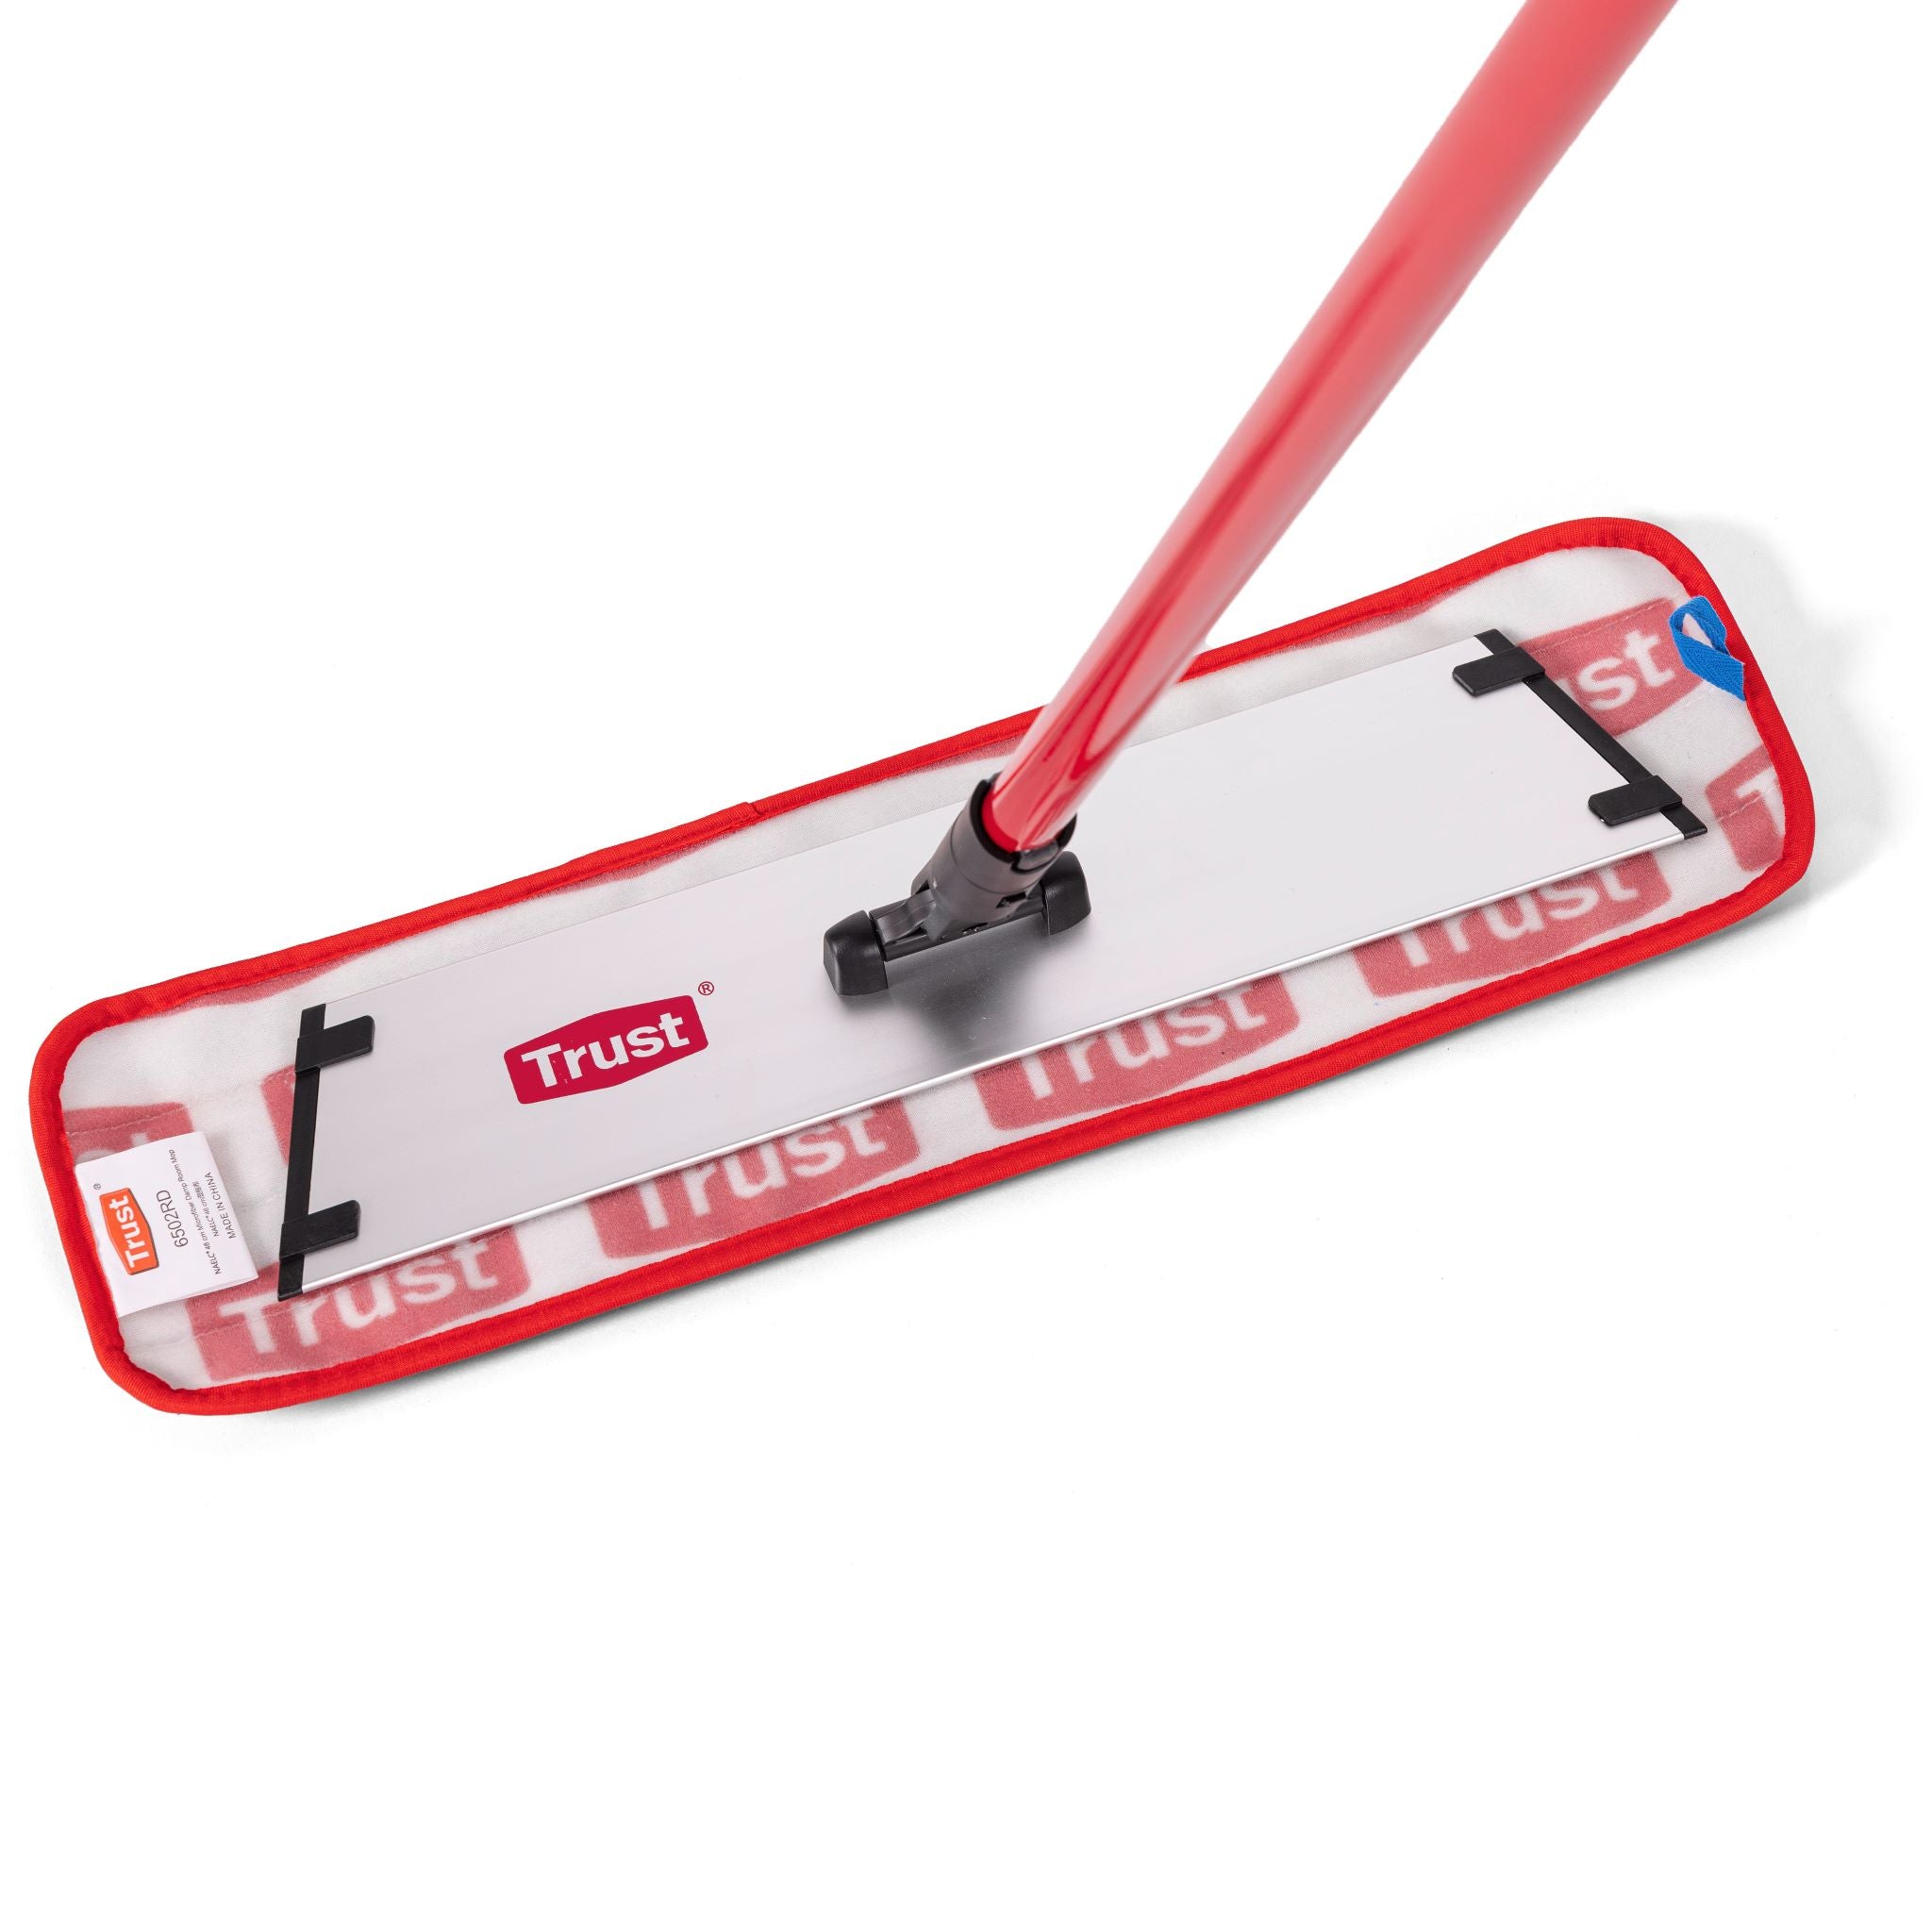 TRUST NAELC Quick Connect Handle - Red